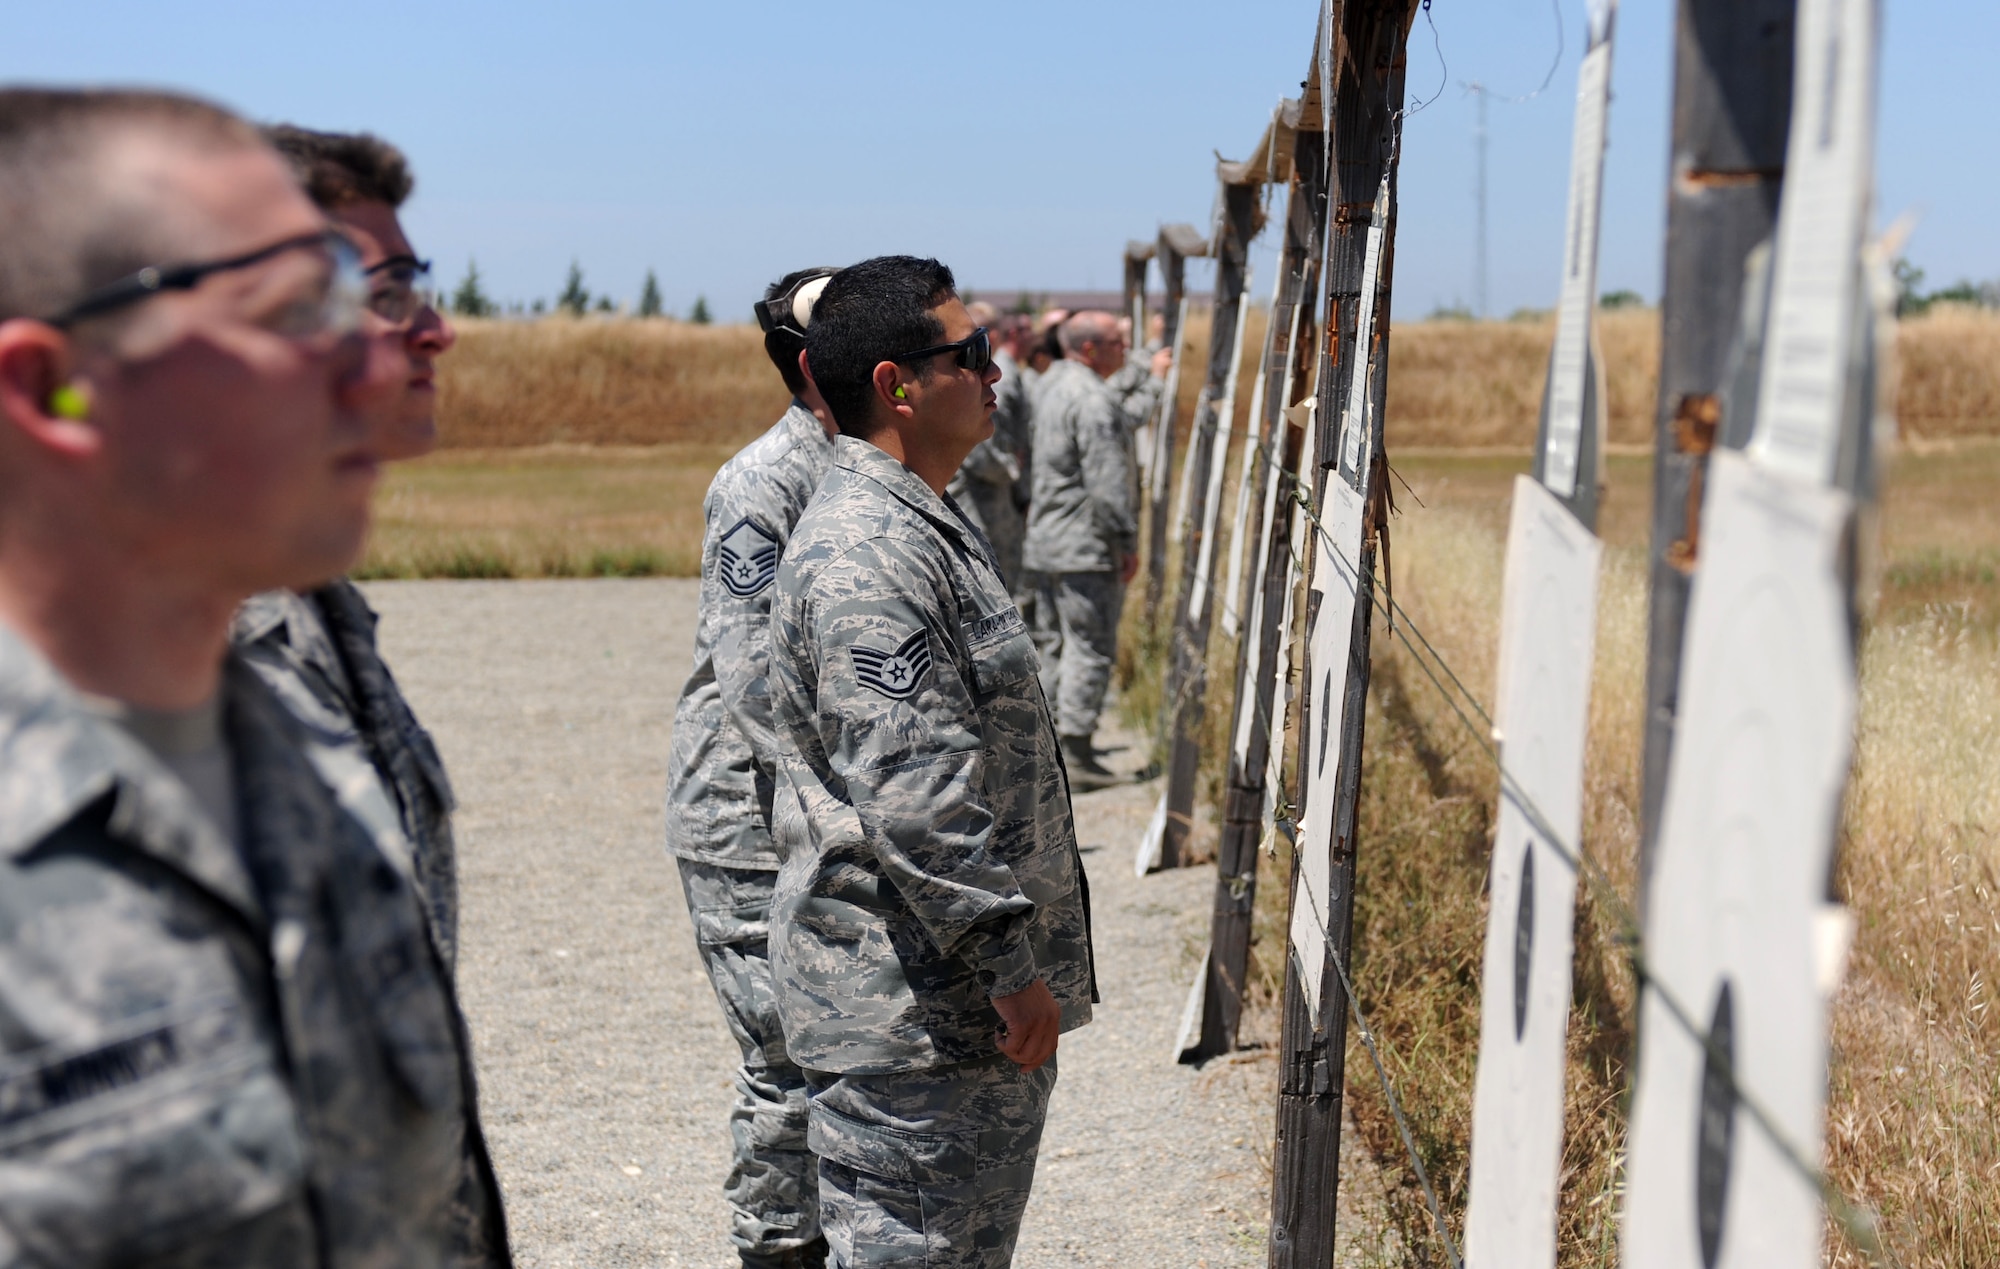 Airmen inspect their targets at the Combat Arms Training and Maintenance range on Beale Air Force Base, Calif., May 14, 2013. Seventy-five Airmen fired the M16 rifle, and the top 10 percent will receive an excellence in competition badge. (U.S. Air Force photo by Airman 1st Class Bobby Cummings/Released)